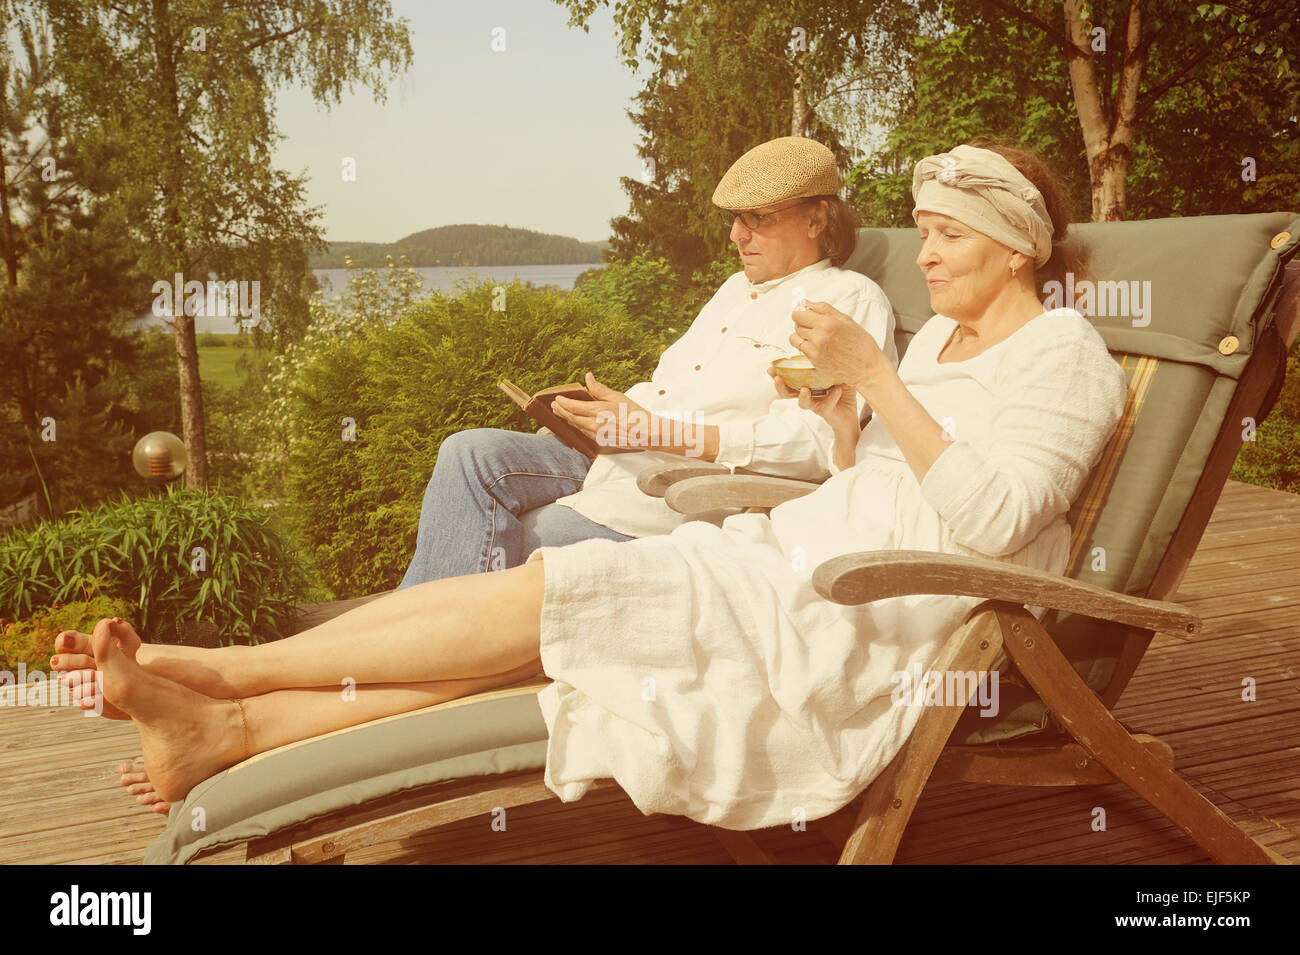 Senior couple relax in deckchairs on a wooden terrace, She is eating from a bowl and he is reading a book. Digital filters used Stock Photo